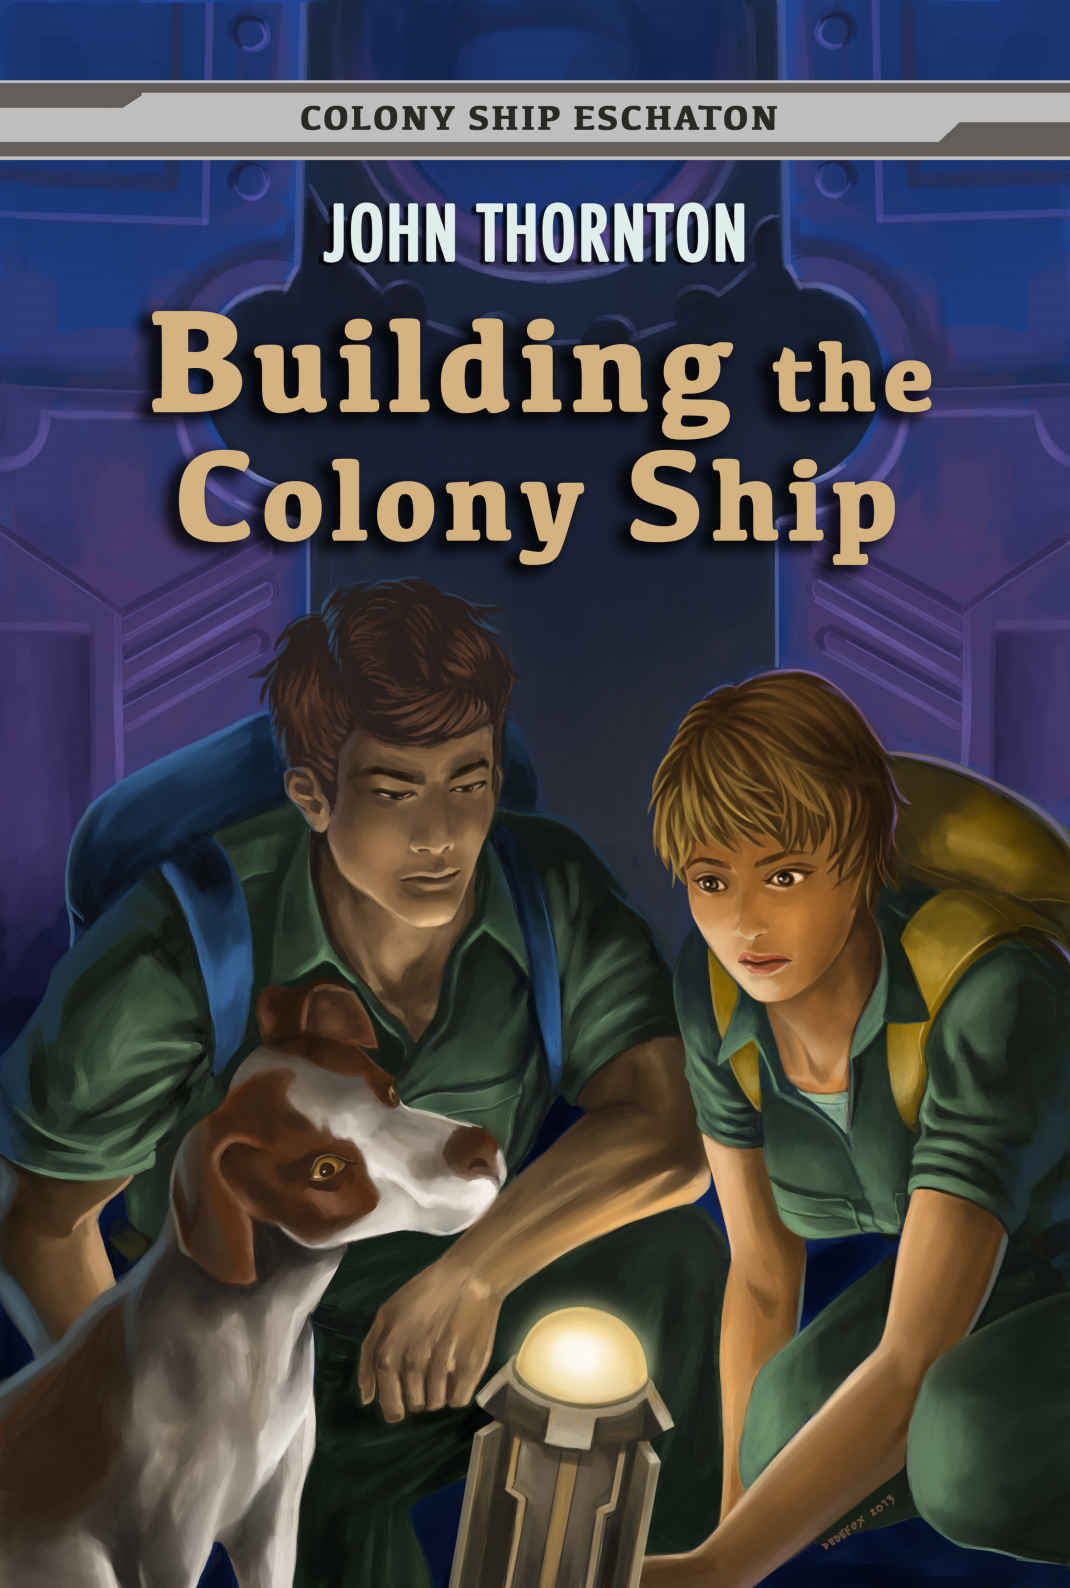 Building the Colony Ship